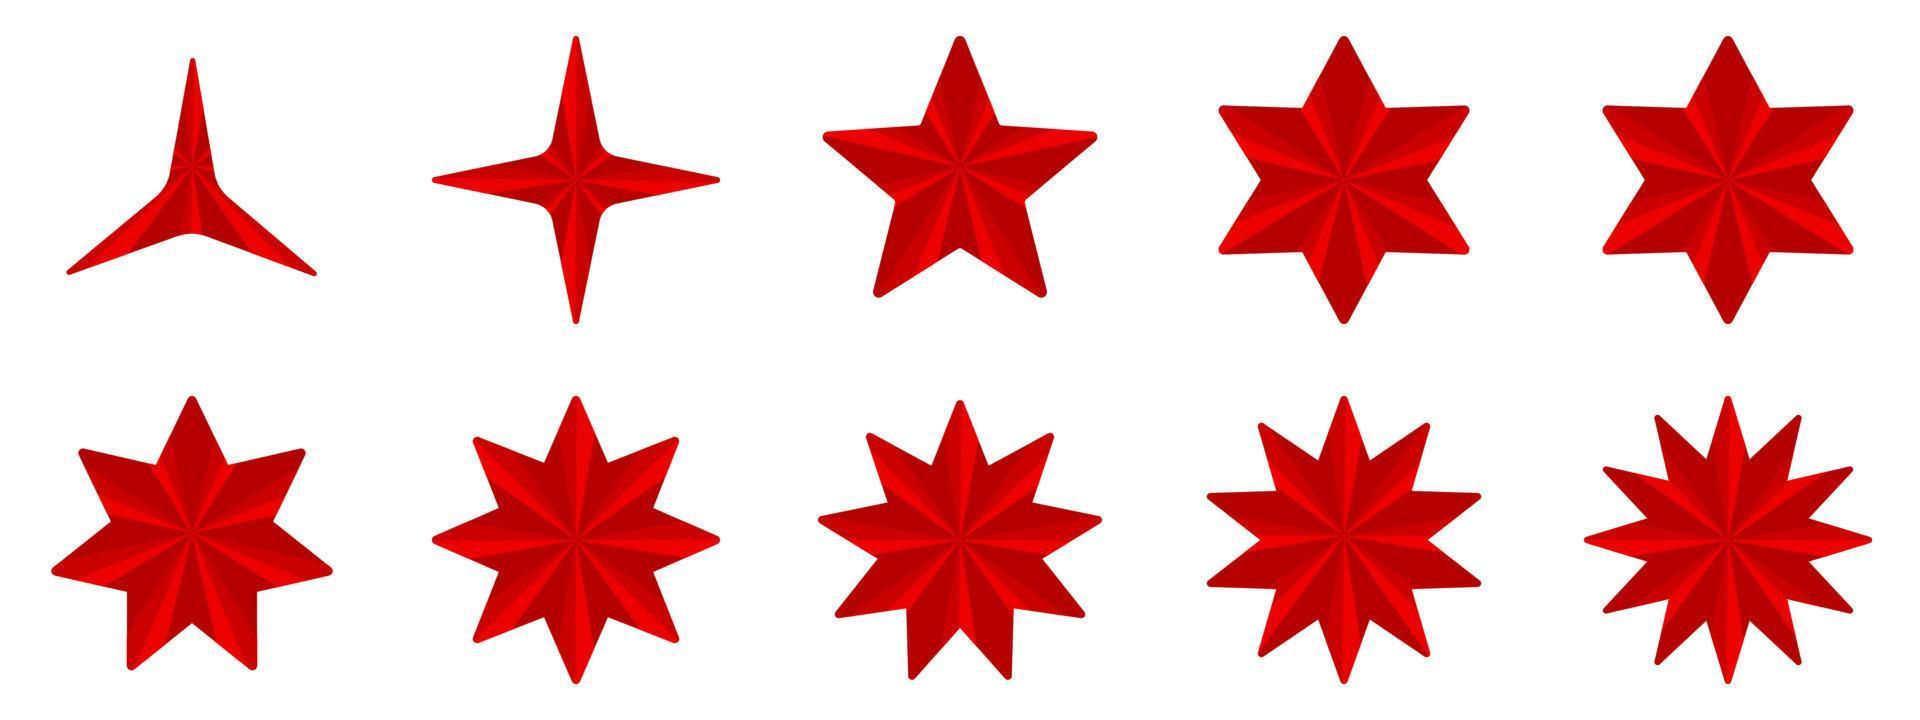 Set of red starburst shape, abstract background texture vector illustration